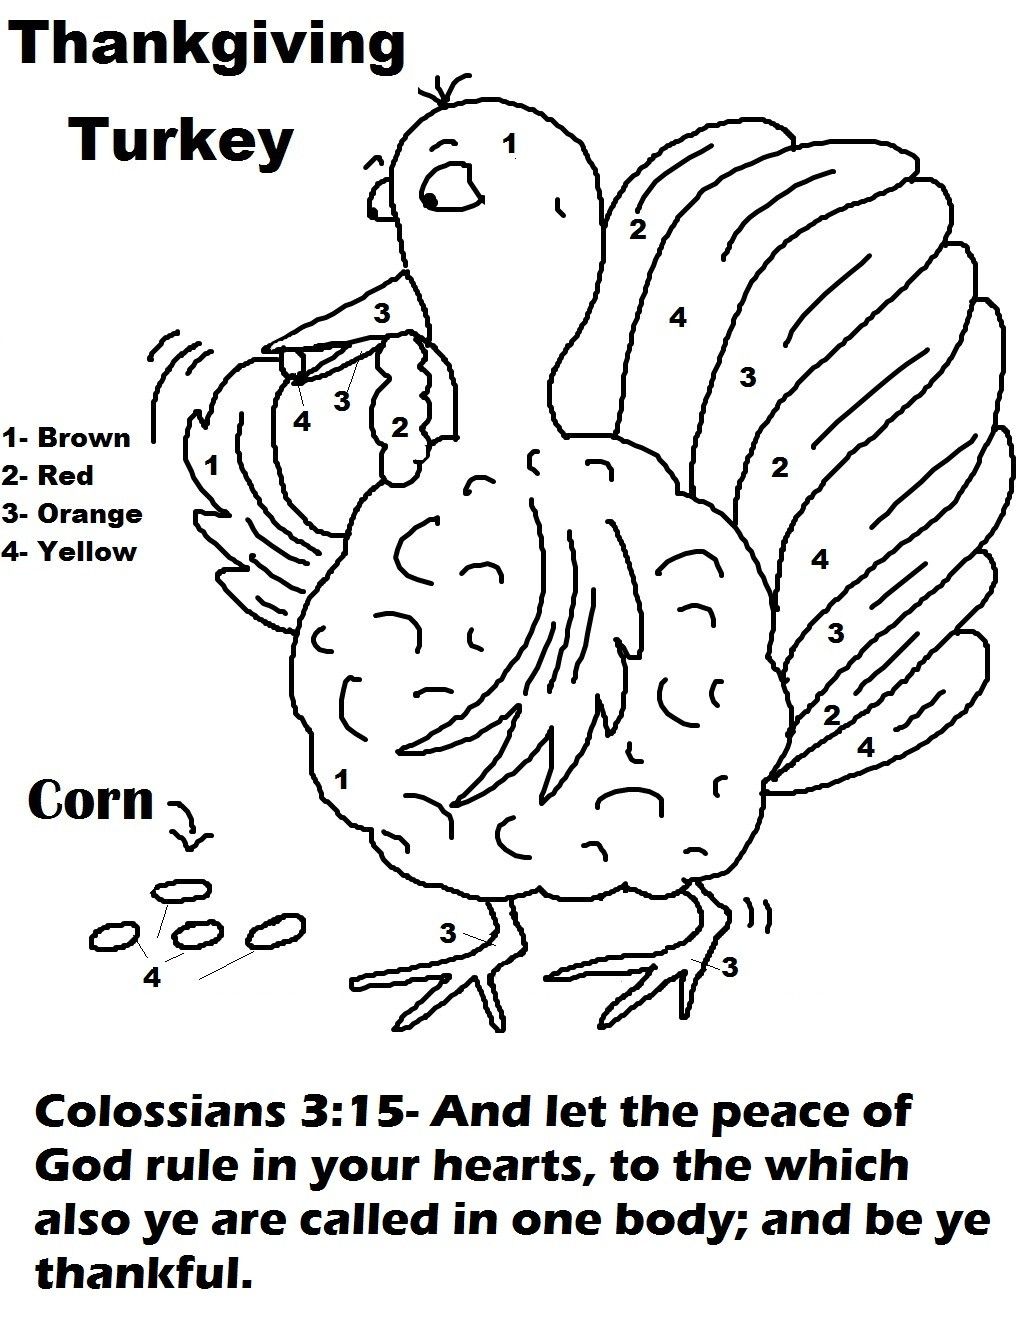 religious-thanksgiving-coloring-pages-free-printable-tooth-the-movie